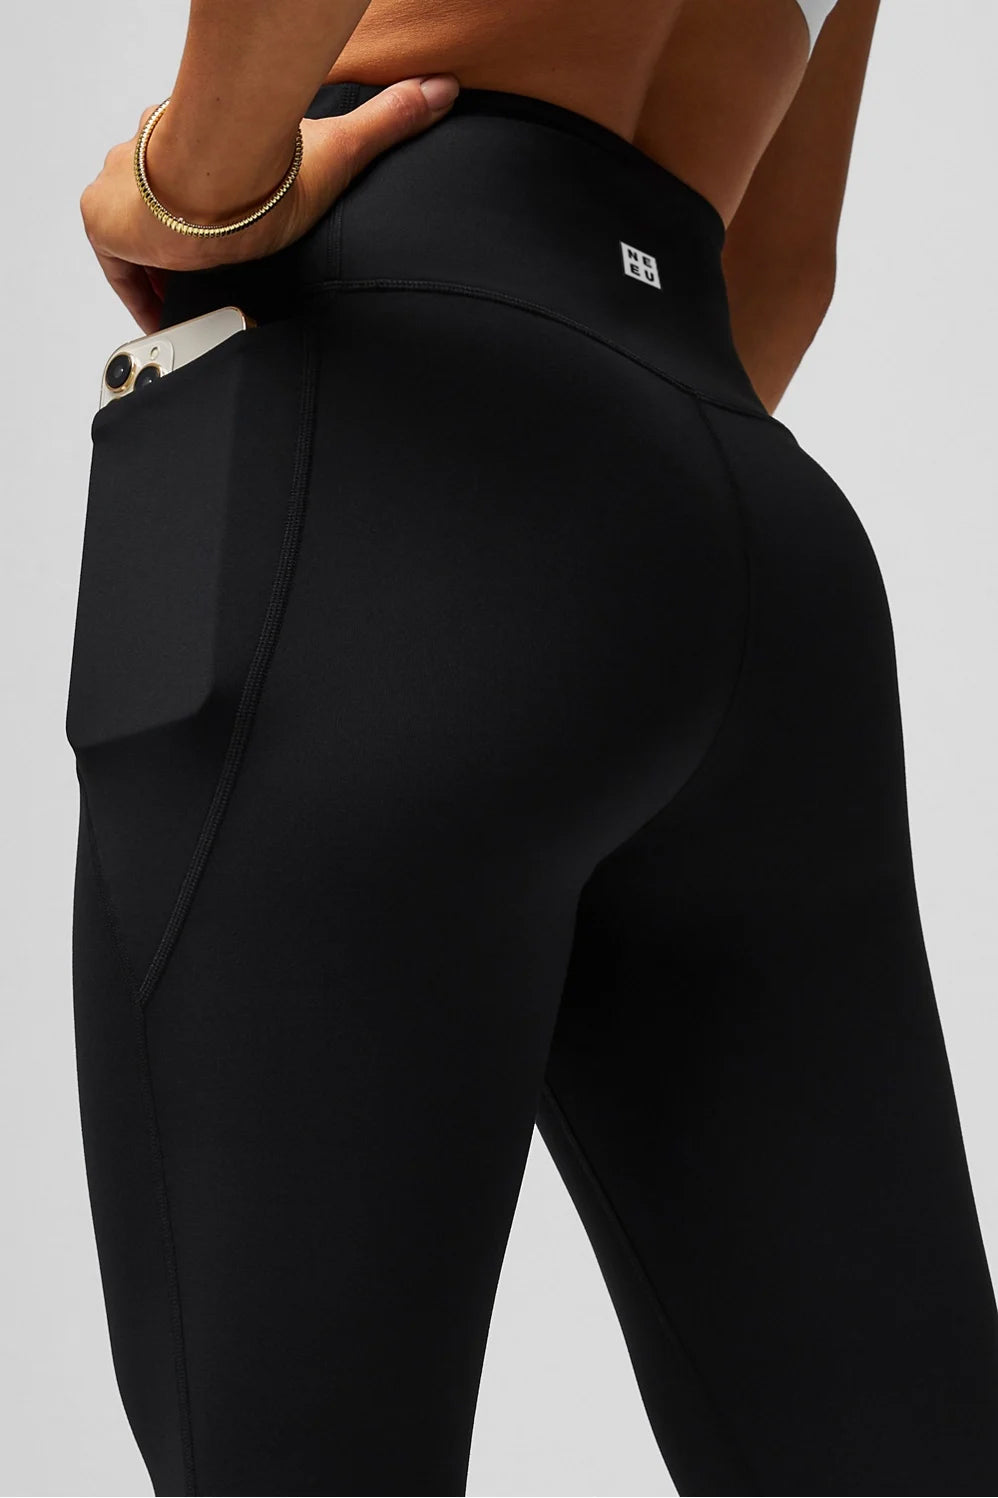 Buy ALONG FIT Yoga Pants for Women with Cell Phone Pockets Leggings Tummy  Control Yoga Leggings at Amazon.in